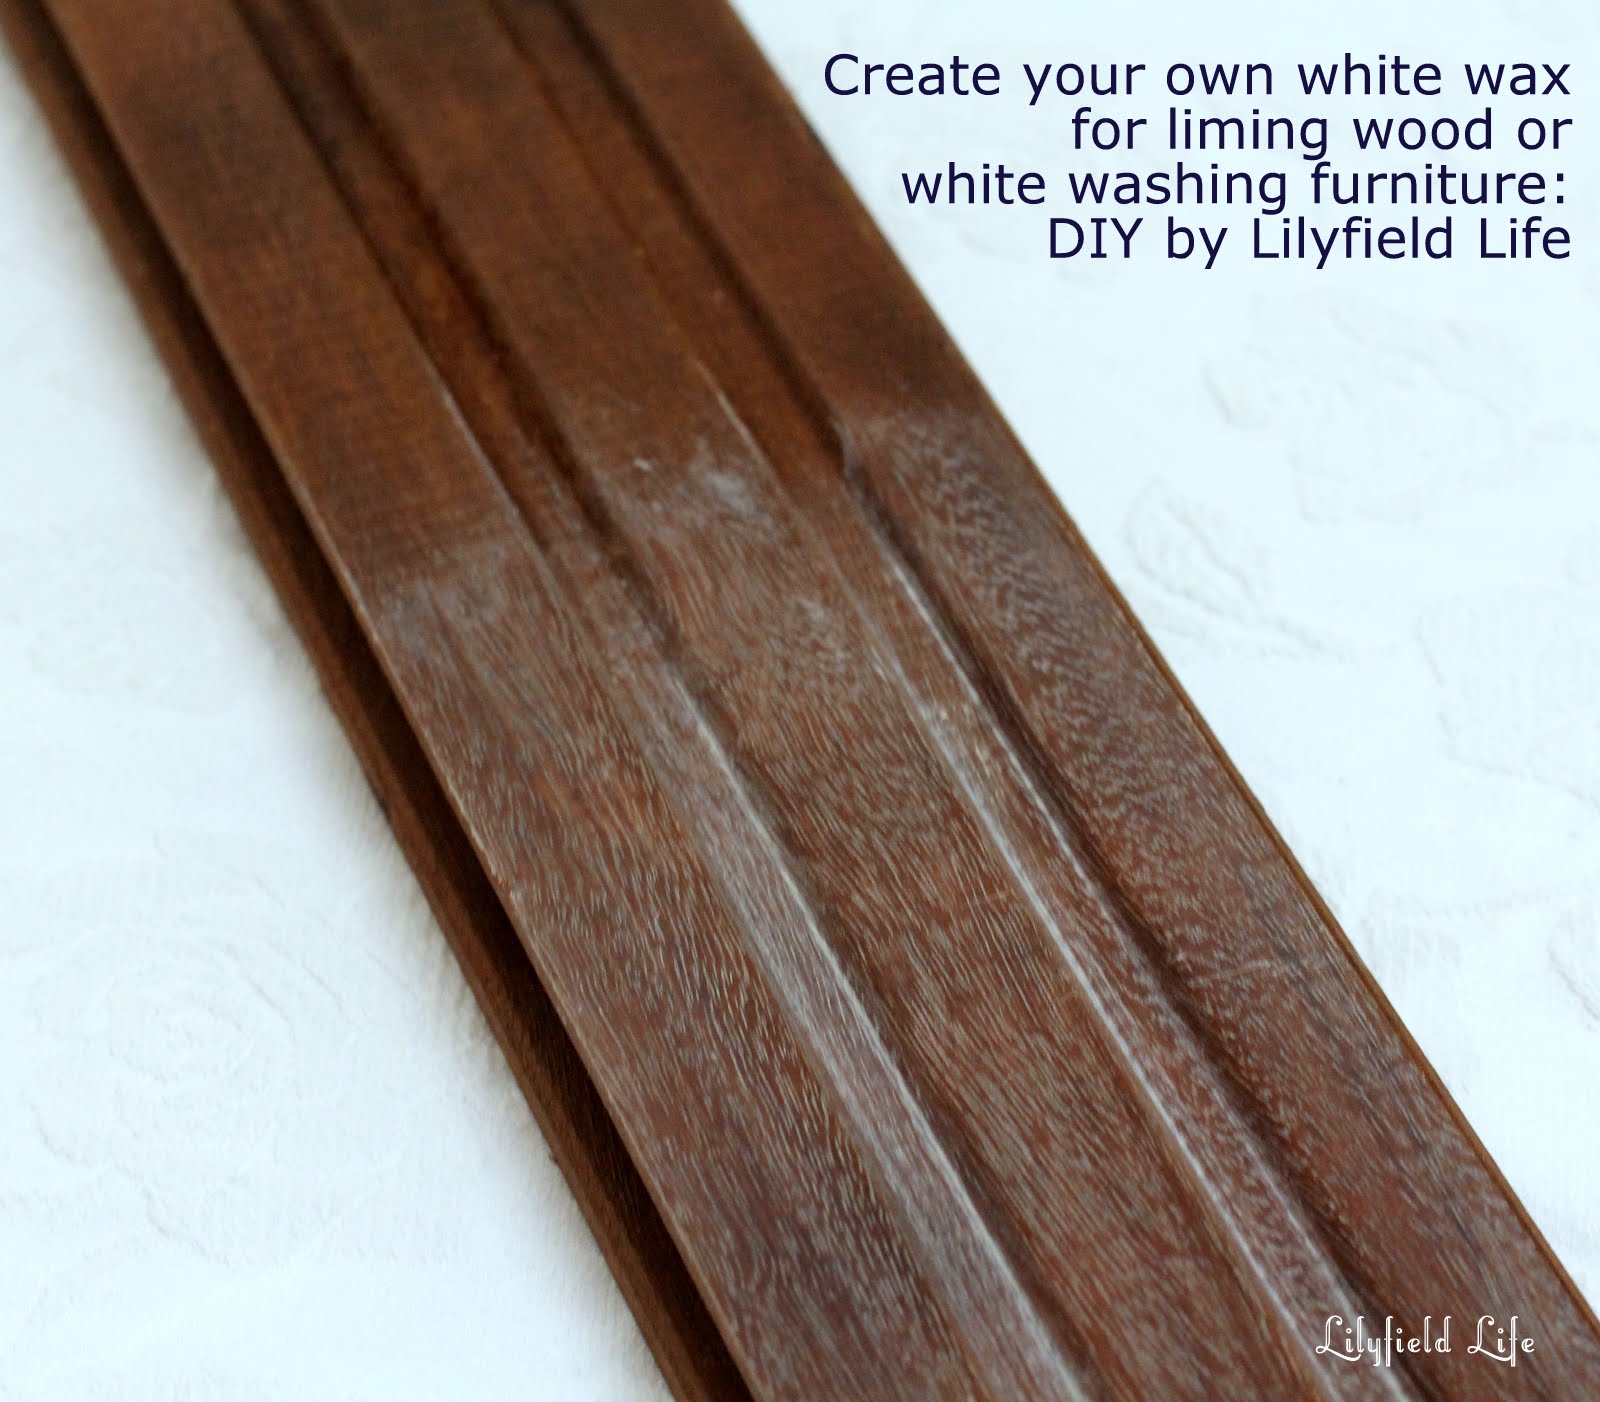 Lilyfield Life: White Wax, Liming Wax: Make your own